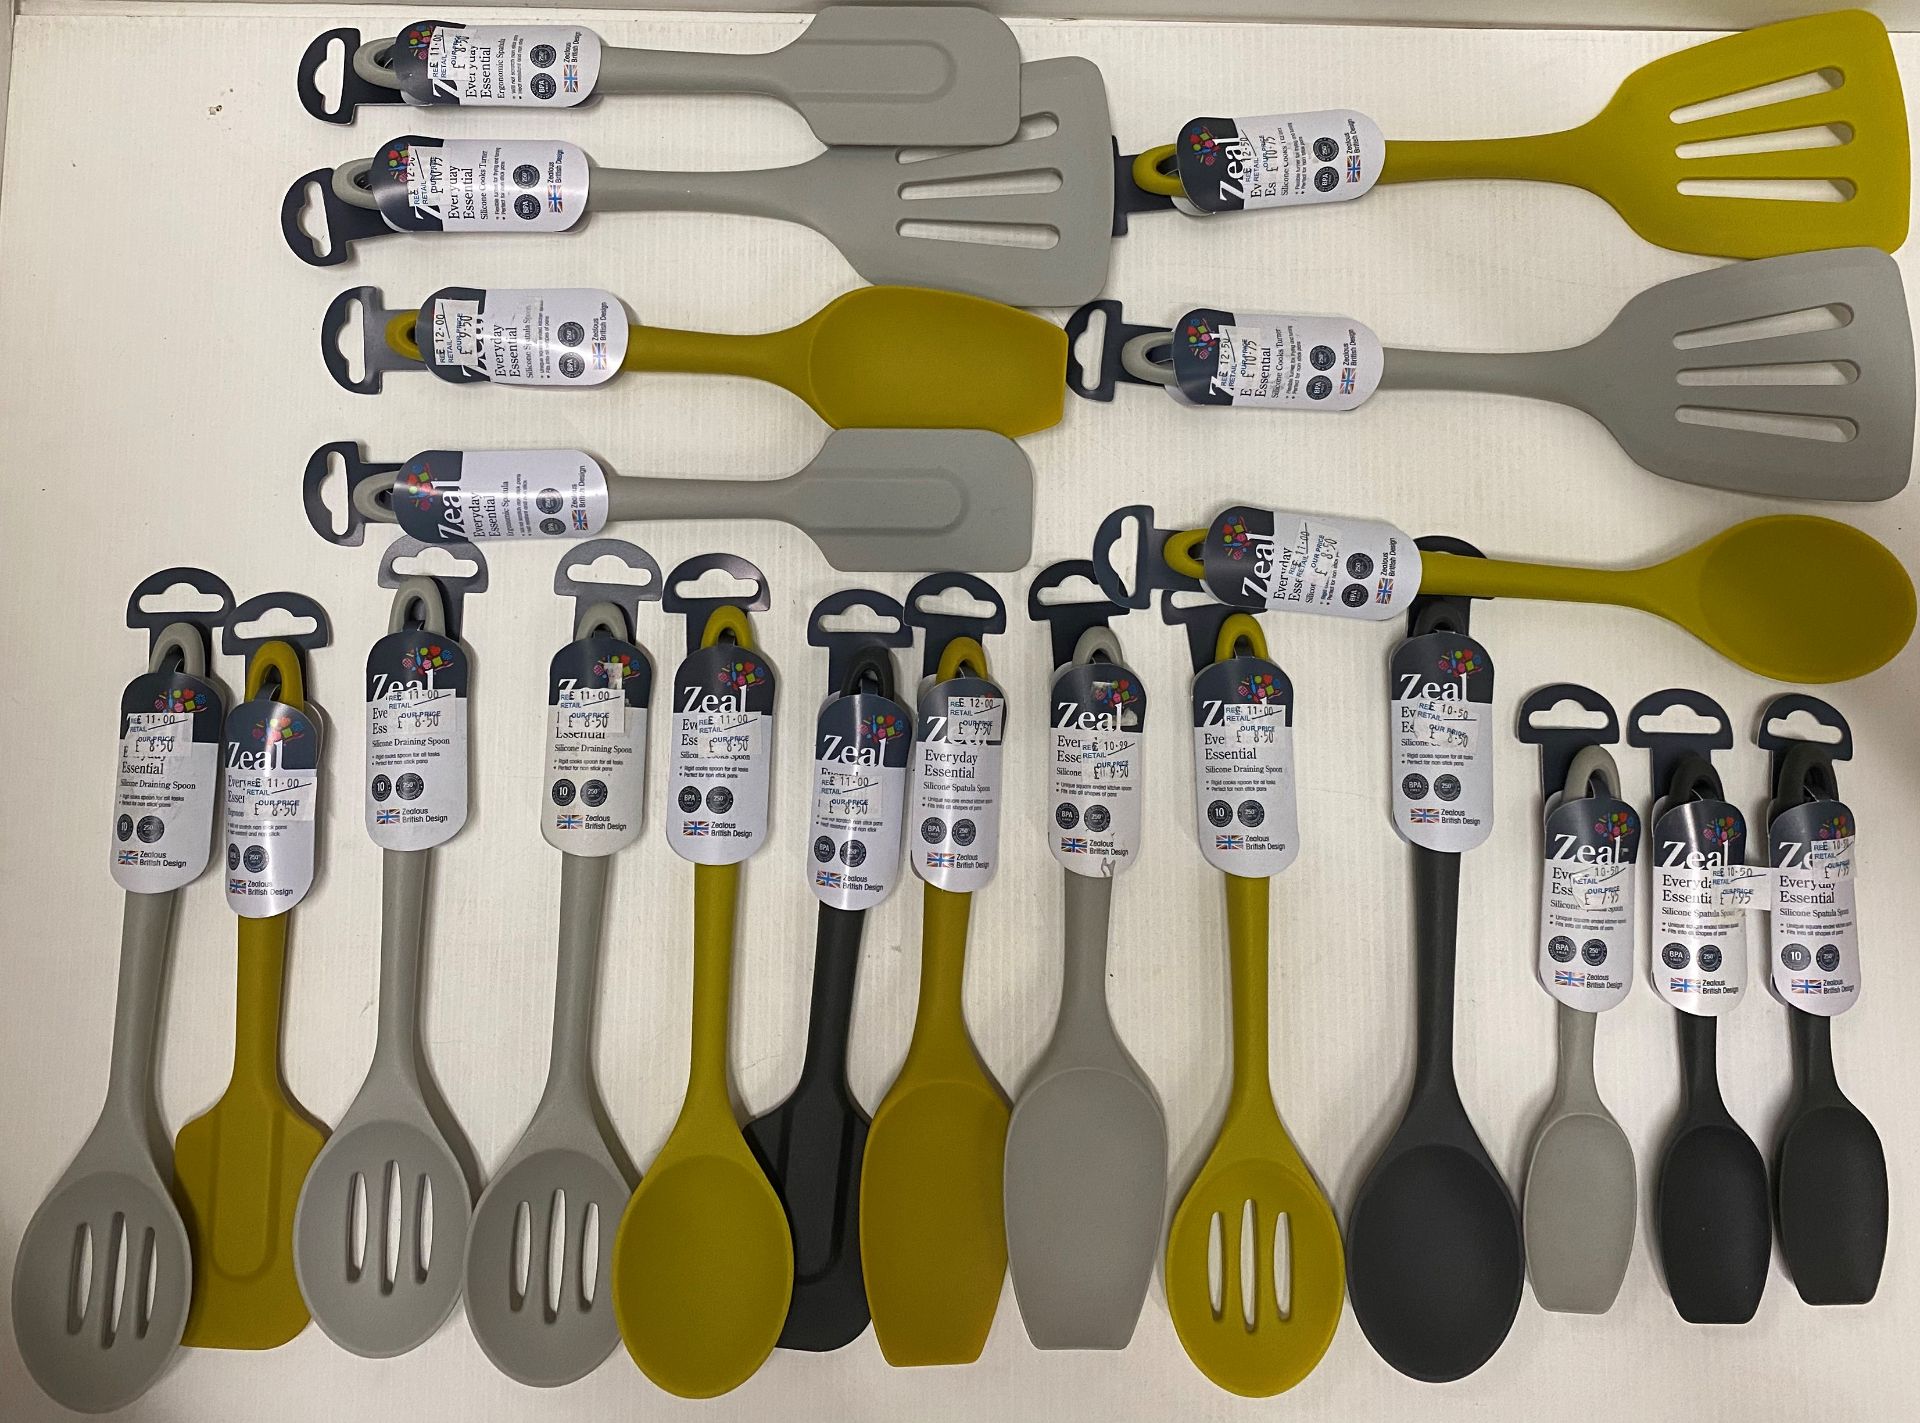 20 x Zeal kitchen accessories - silicone cooks turners (RRP £12.50), ergonomic spatulas (RRP £11.